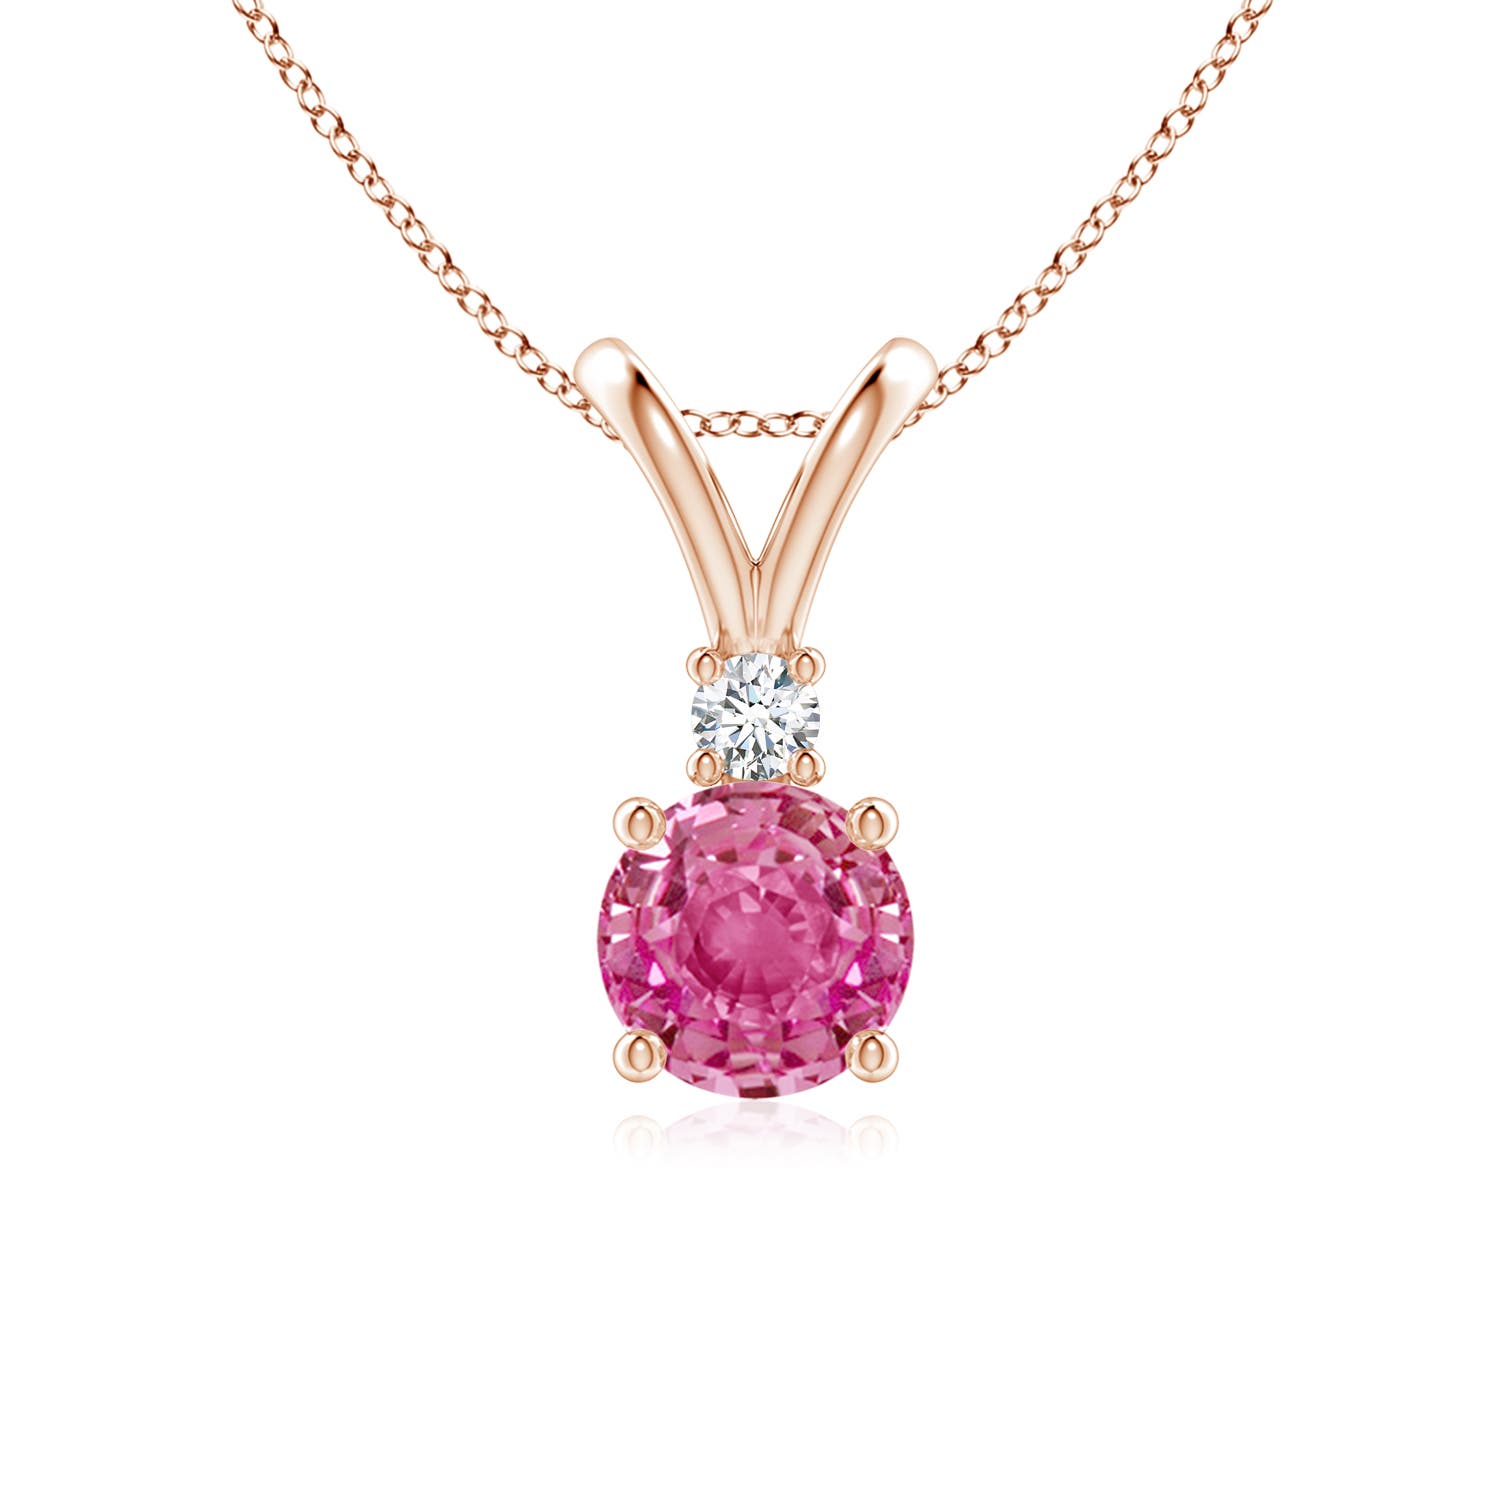 AAA - Pink Sapphire / 1.04 CT / 14 KT Rose Gold